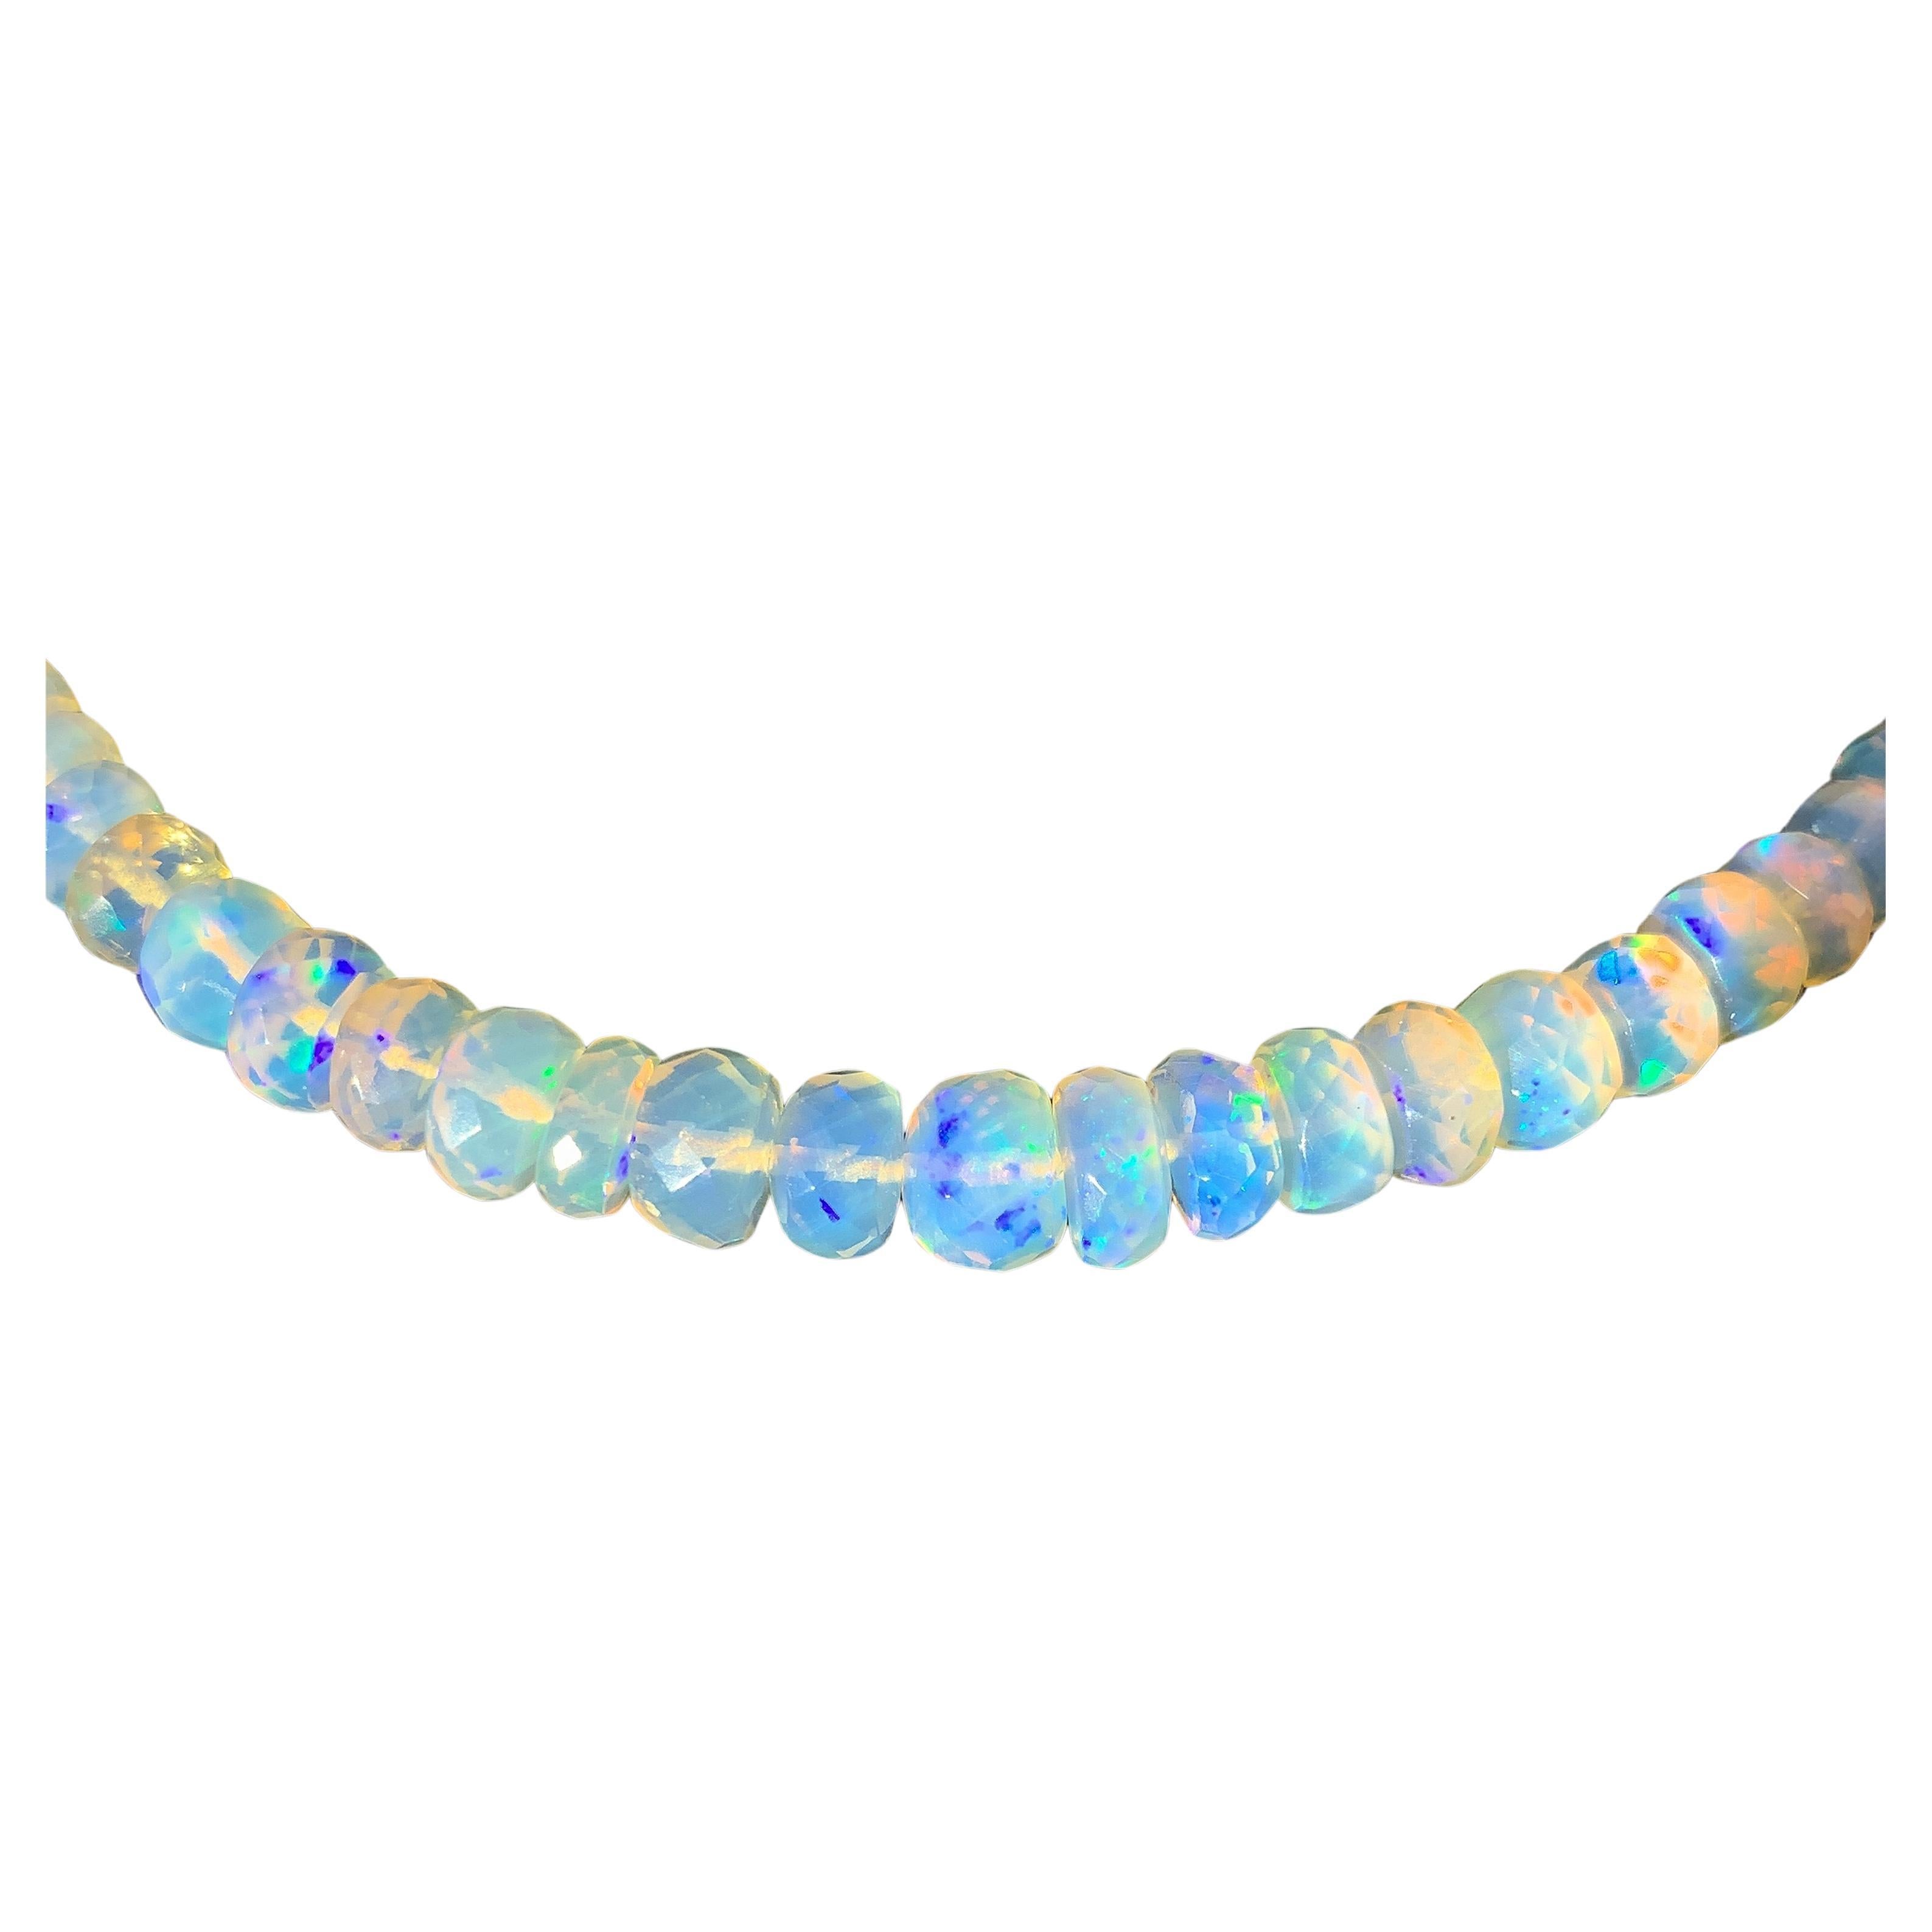 120 carat Strand of Opal Beads 33.5" long with 14K Yellow Gold Clasp